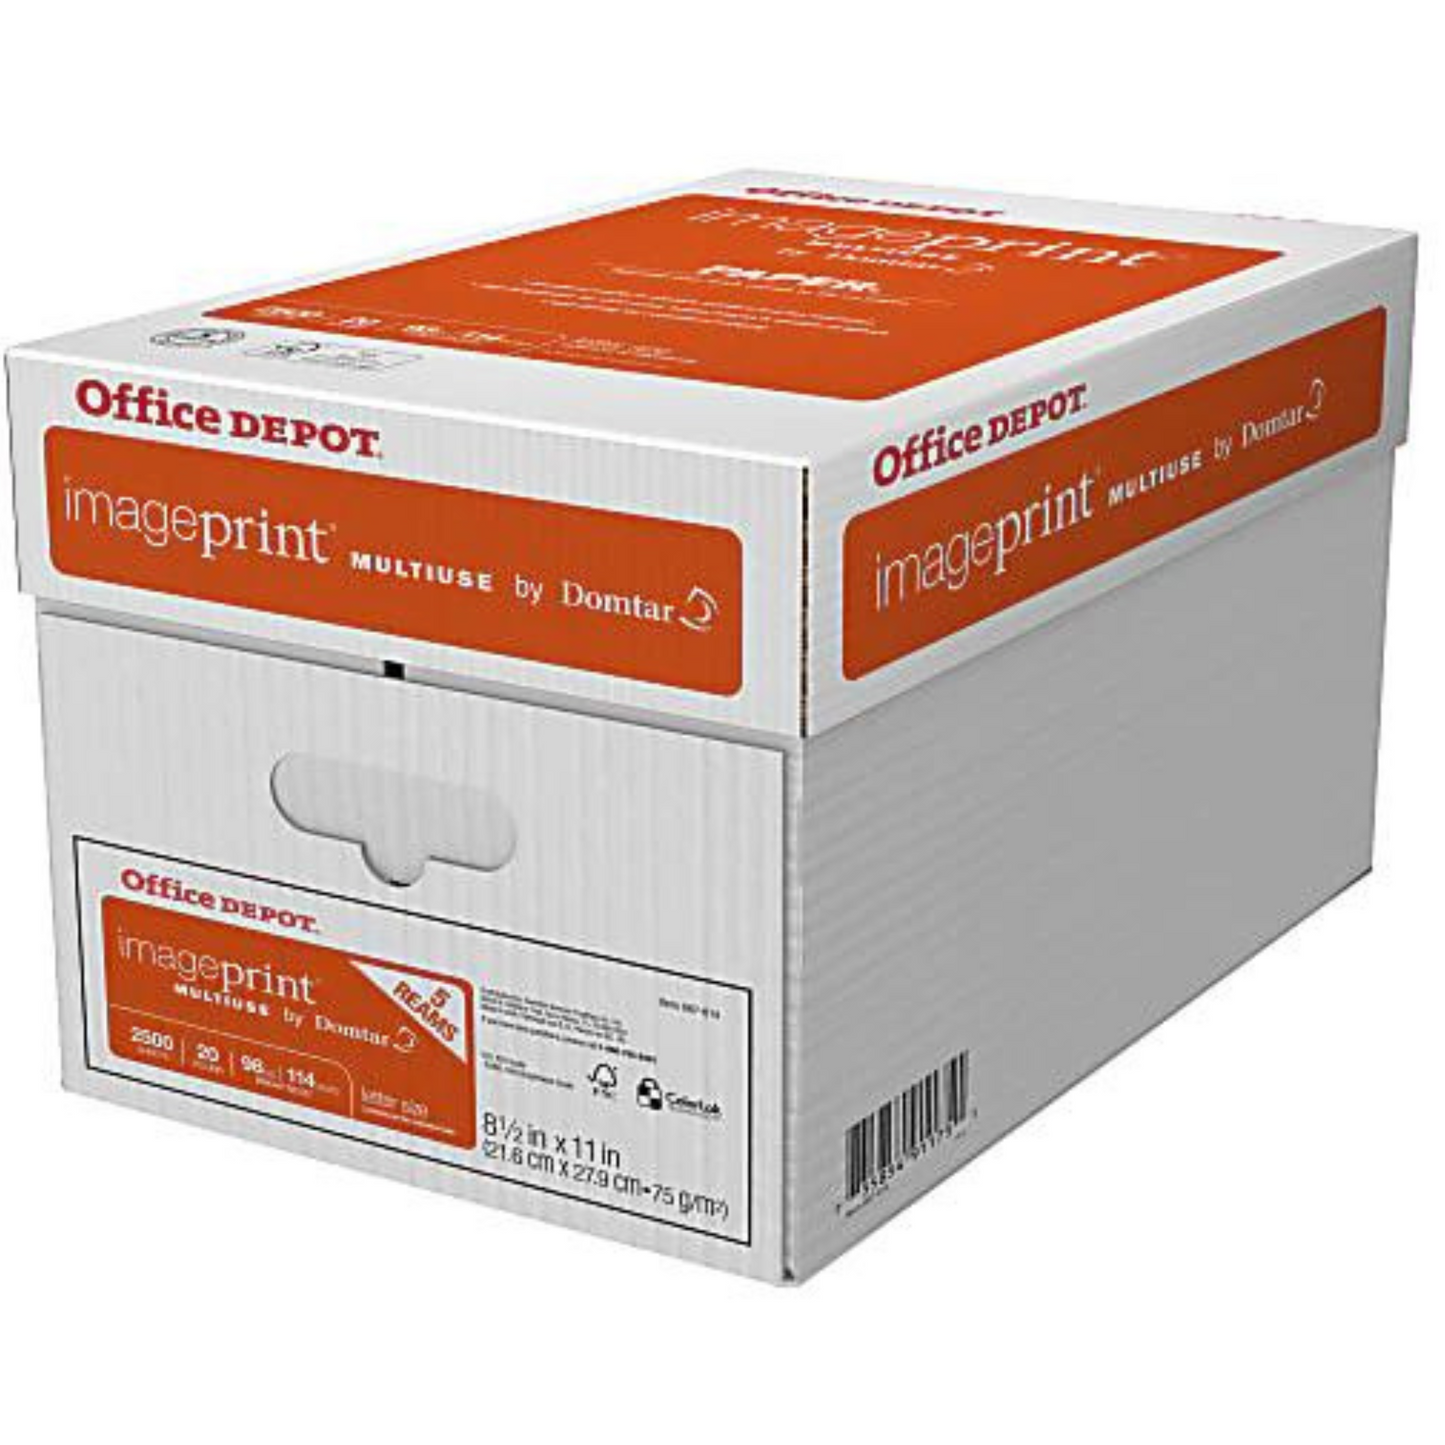 Office Depot Brand ImagePrint Multi-Use Print & Copy Paper, Letter Size 8 1/2" x 11" 98 Brightness, 20 Lb, FSC Certified, White, 500 Sheets Per Ream, Case Of 5 Reams